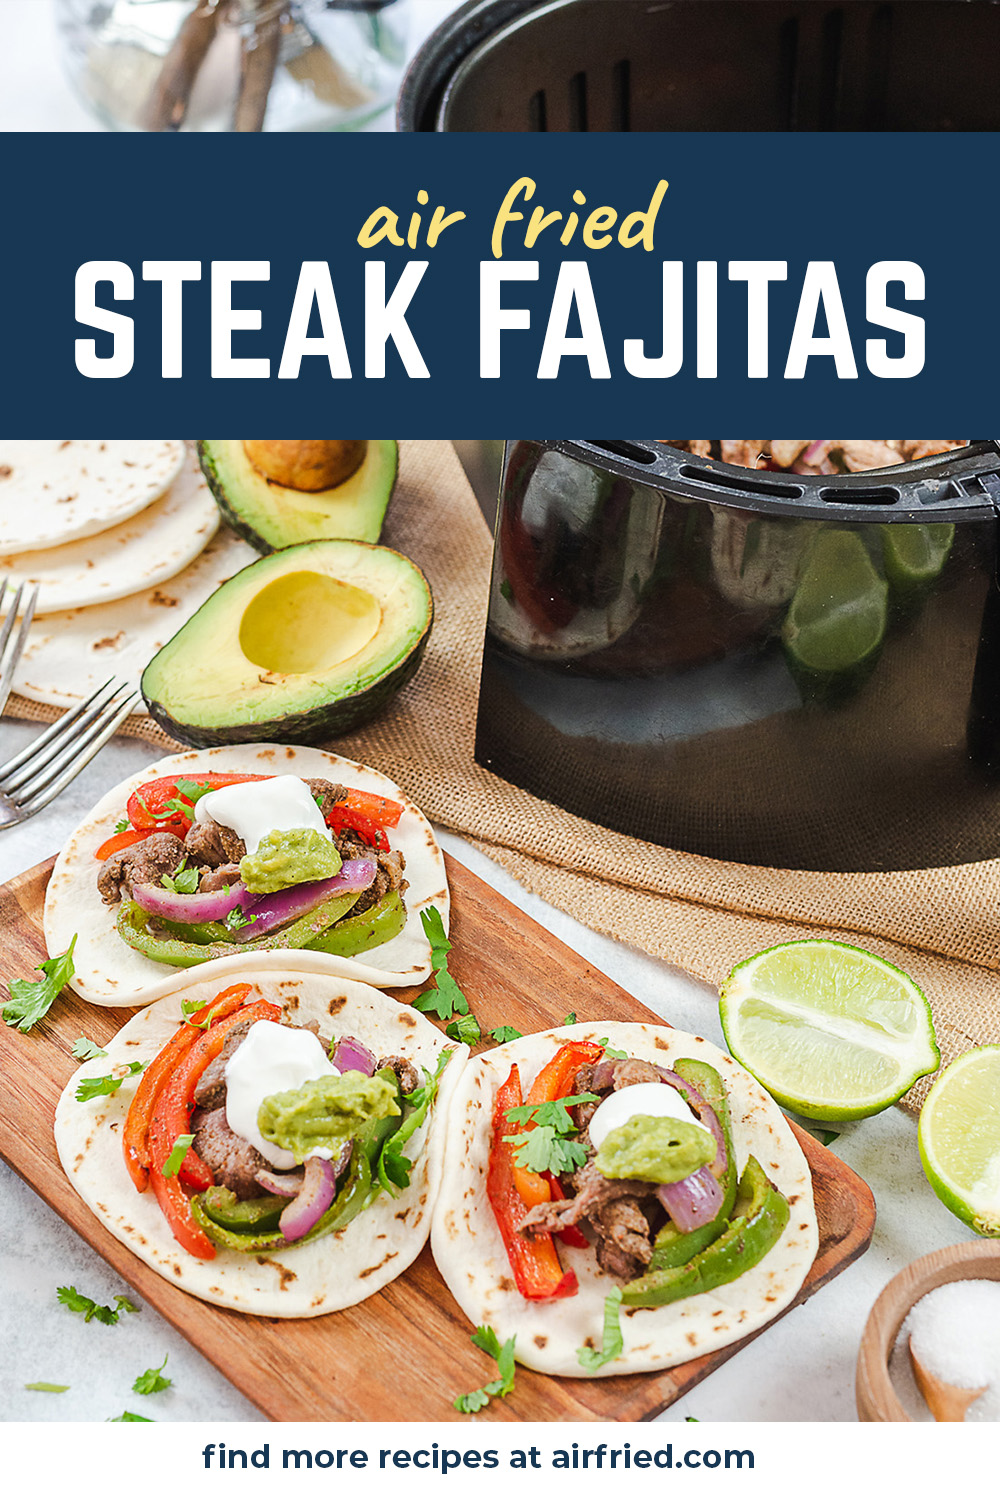 You can cook all the ingredients for your steak fajitas together in your air fryer!